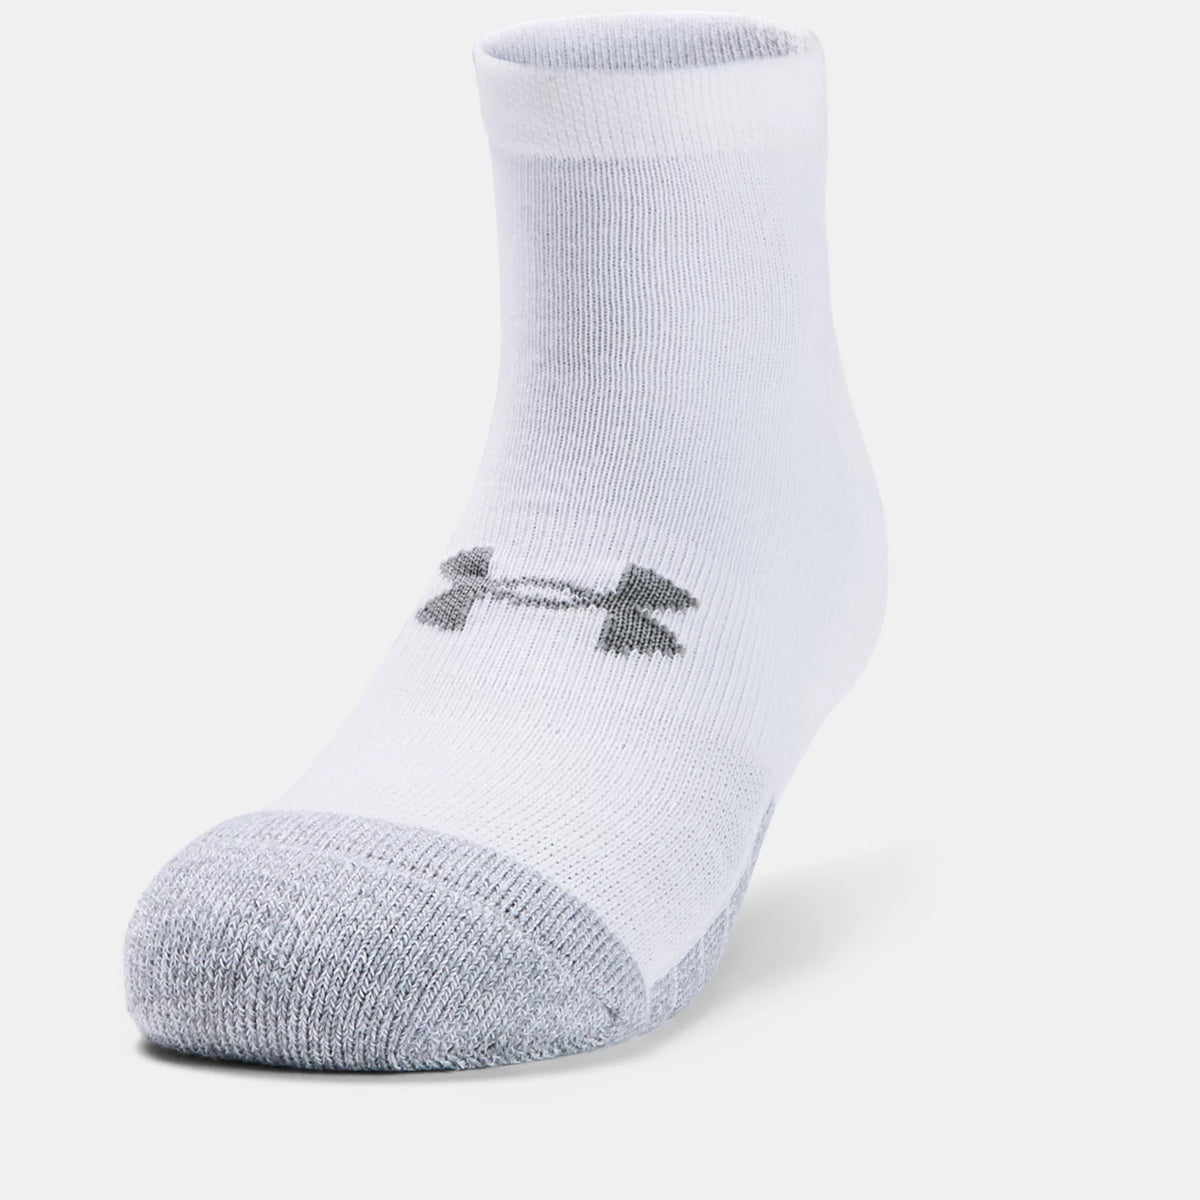 Under Armour Lo Cut Socks 3 Pack: White